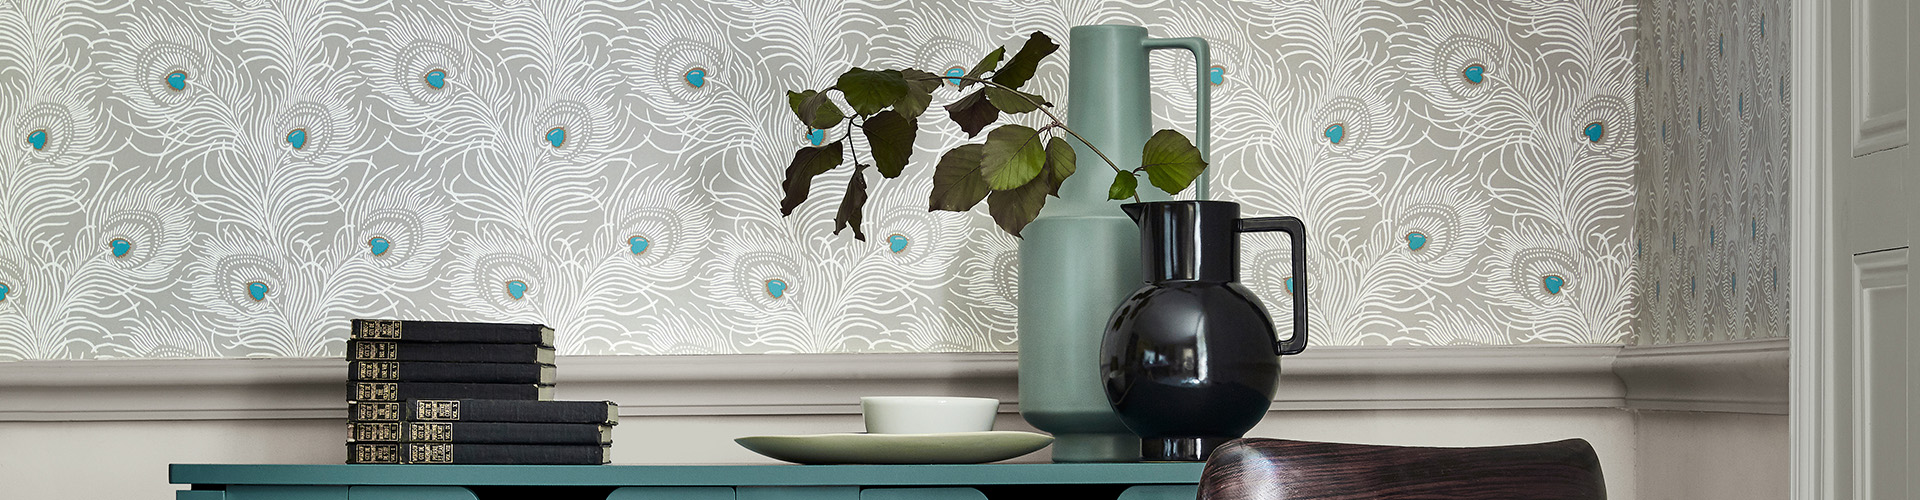 Non-Toxic Wallpaper - Healthy House on the Block